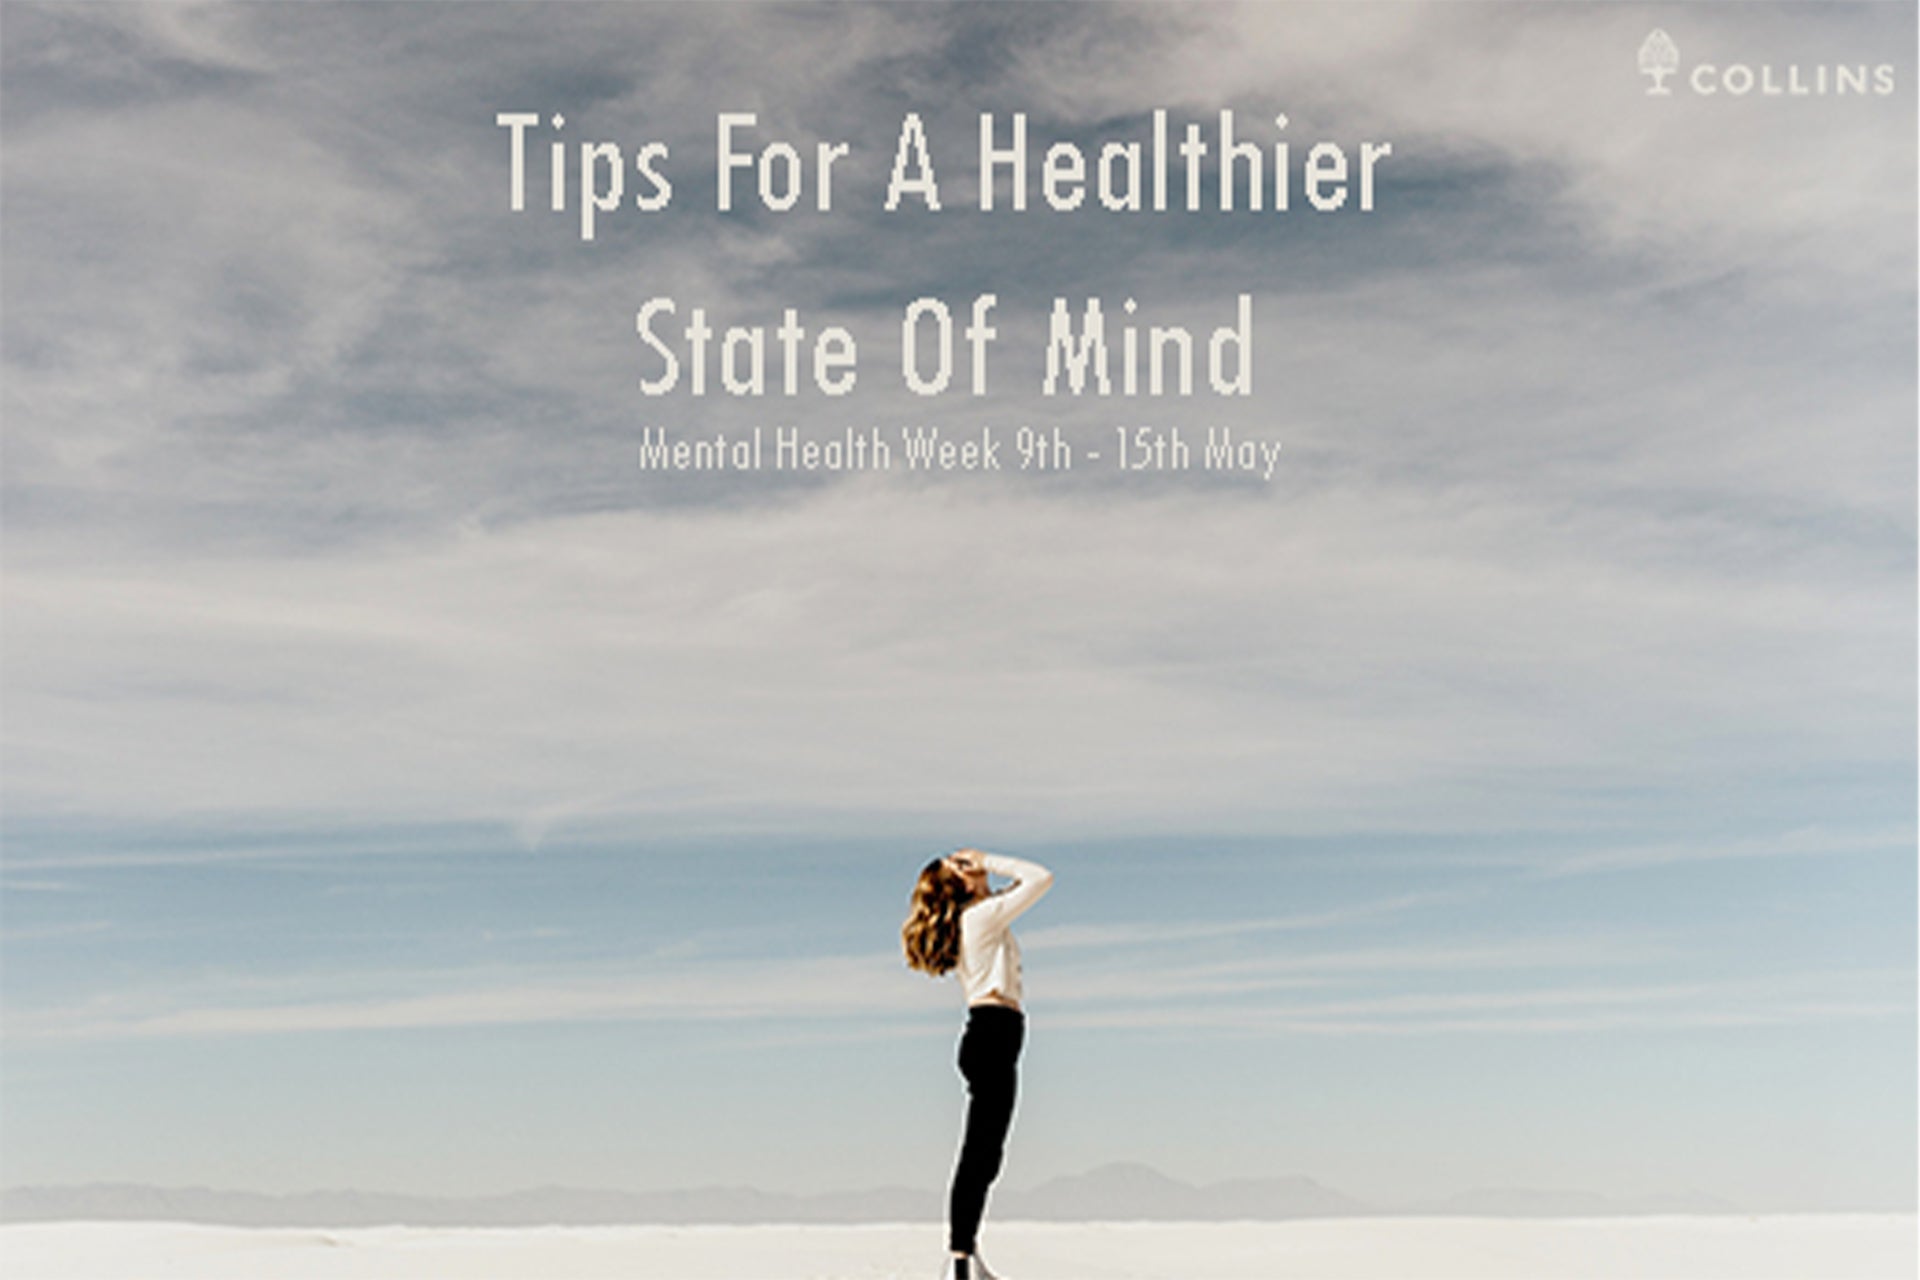 Organising Tips For A Healthier State Of Mind